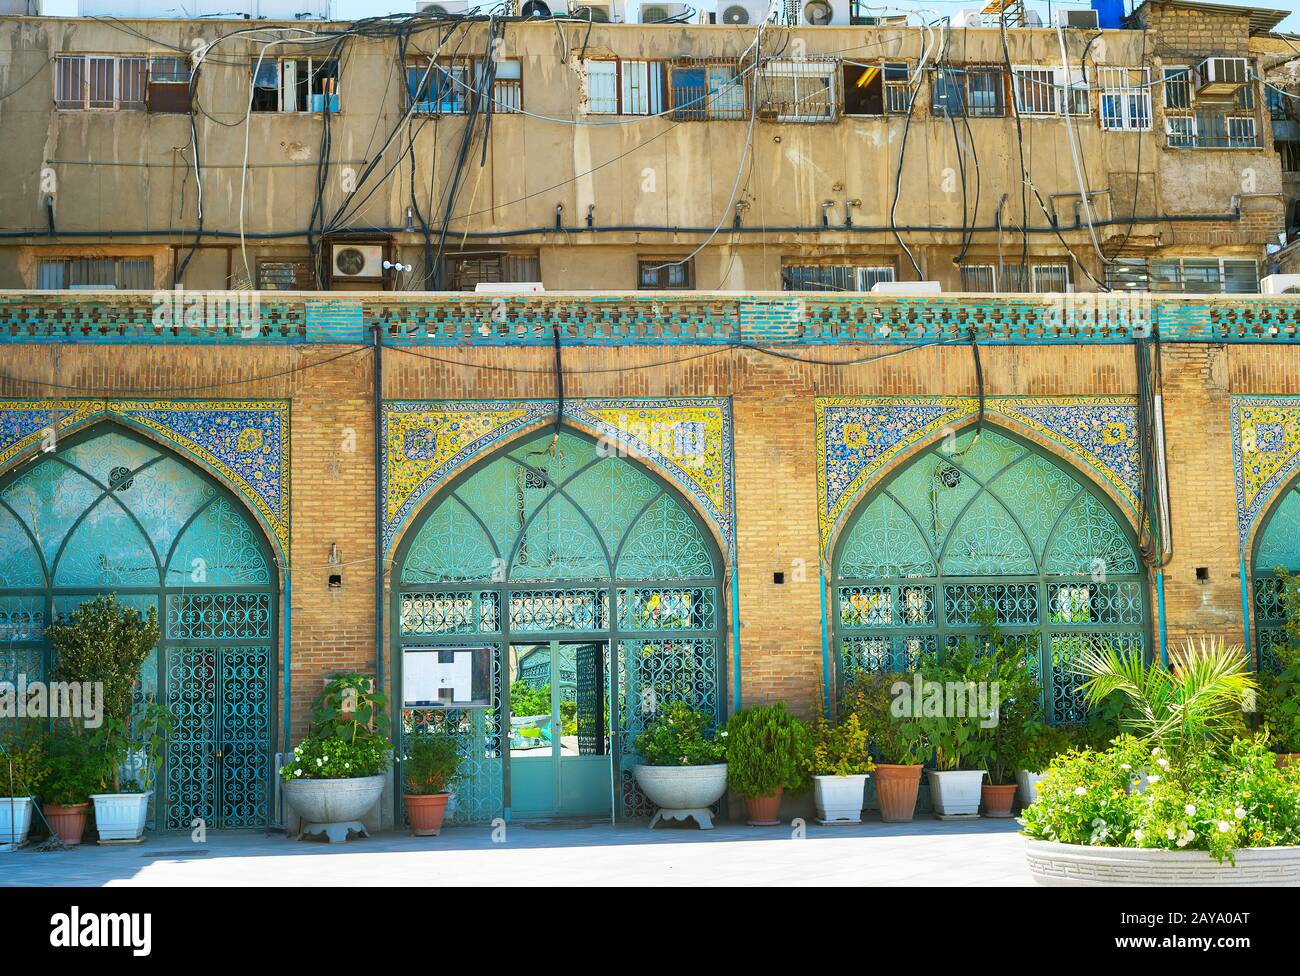 Modern and traditional architecture, Iran Stock Photo